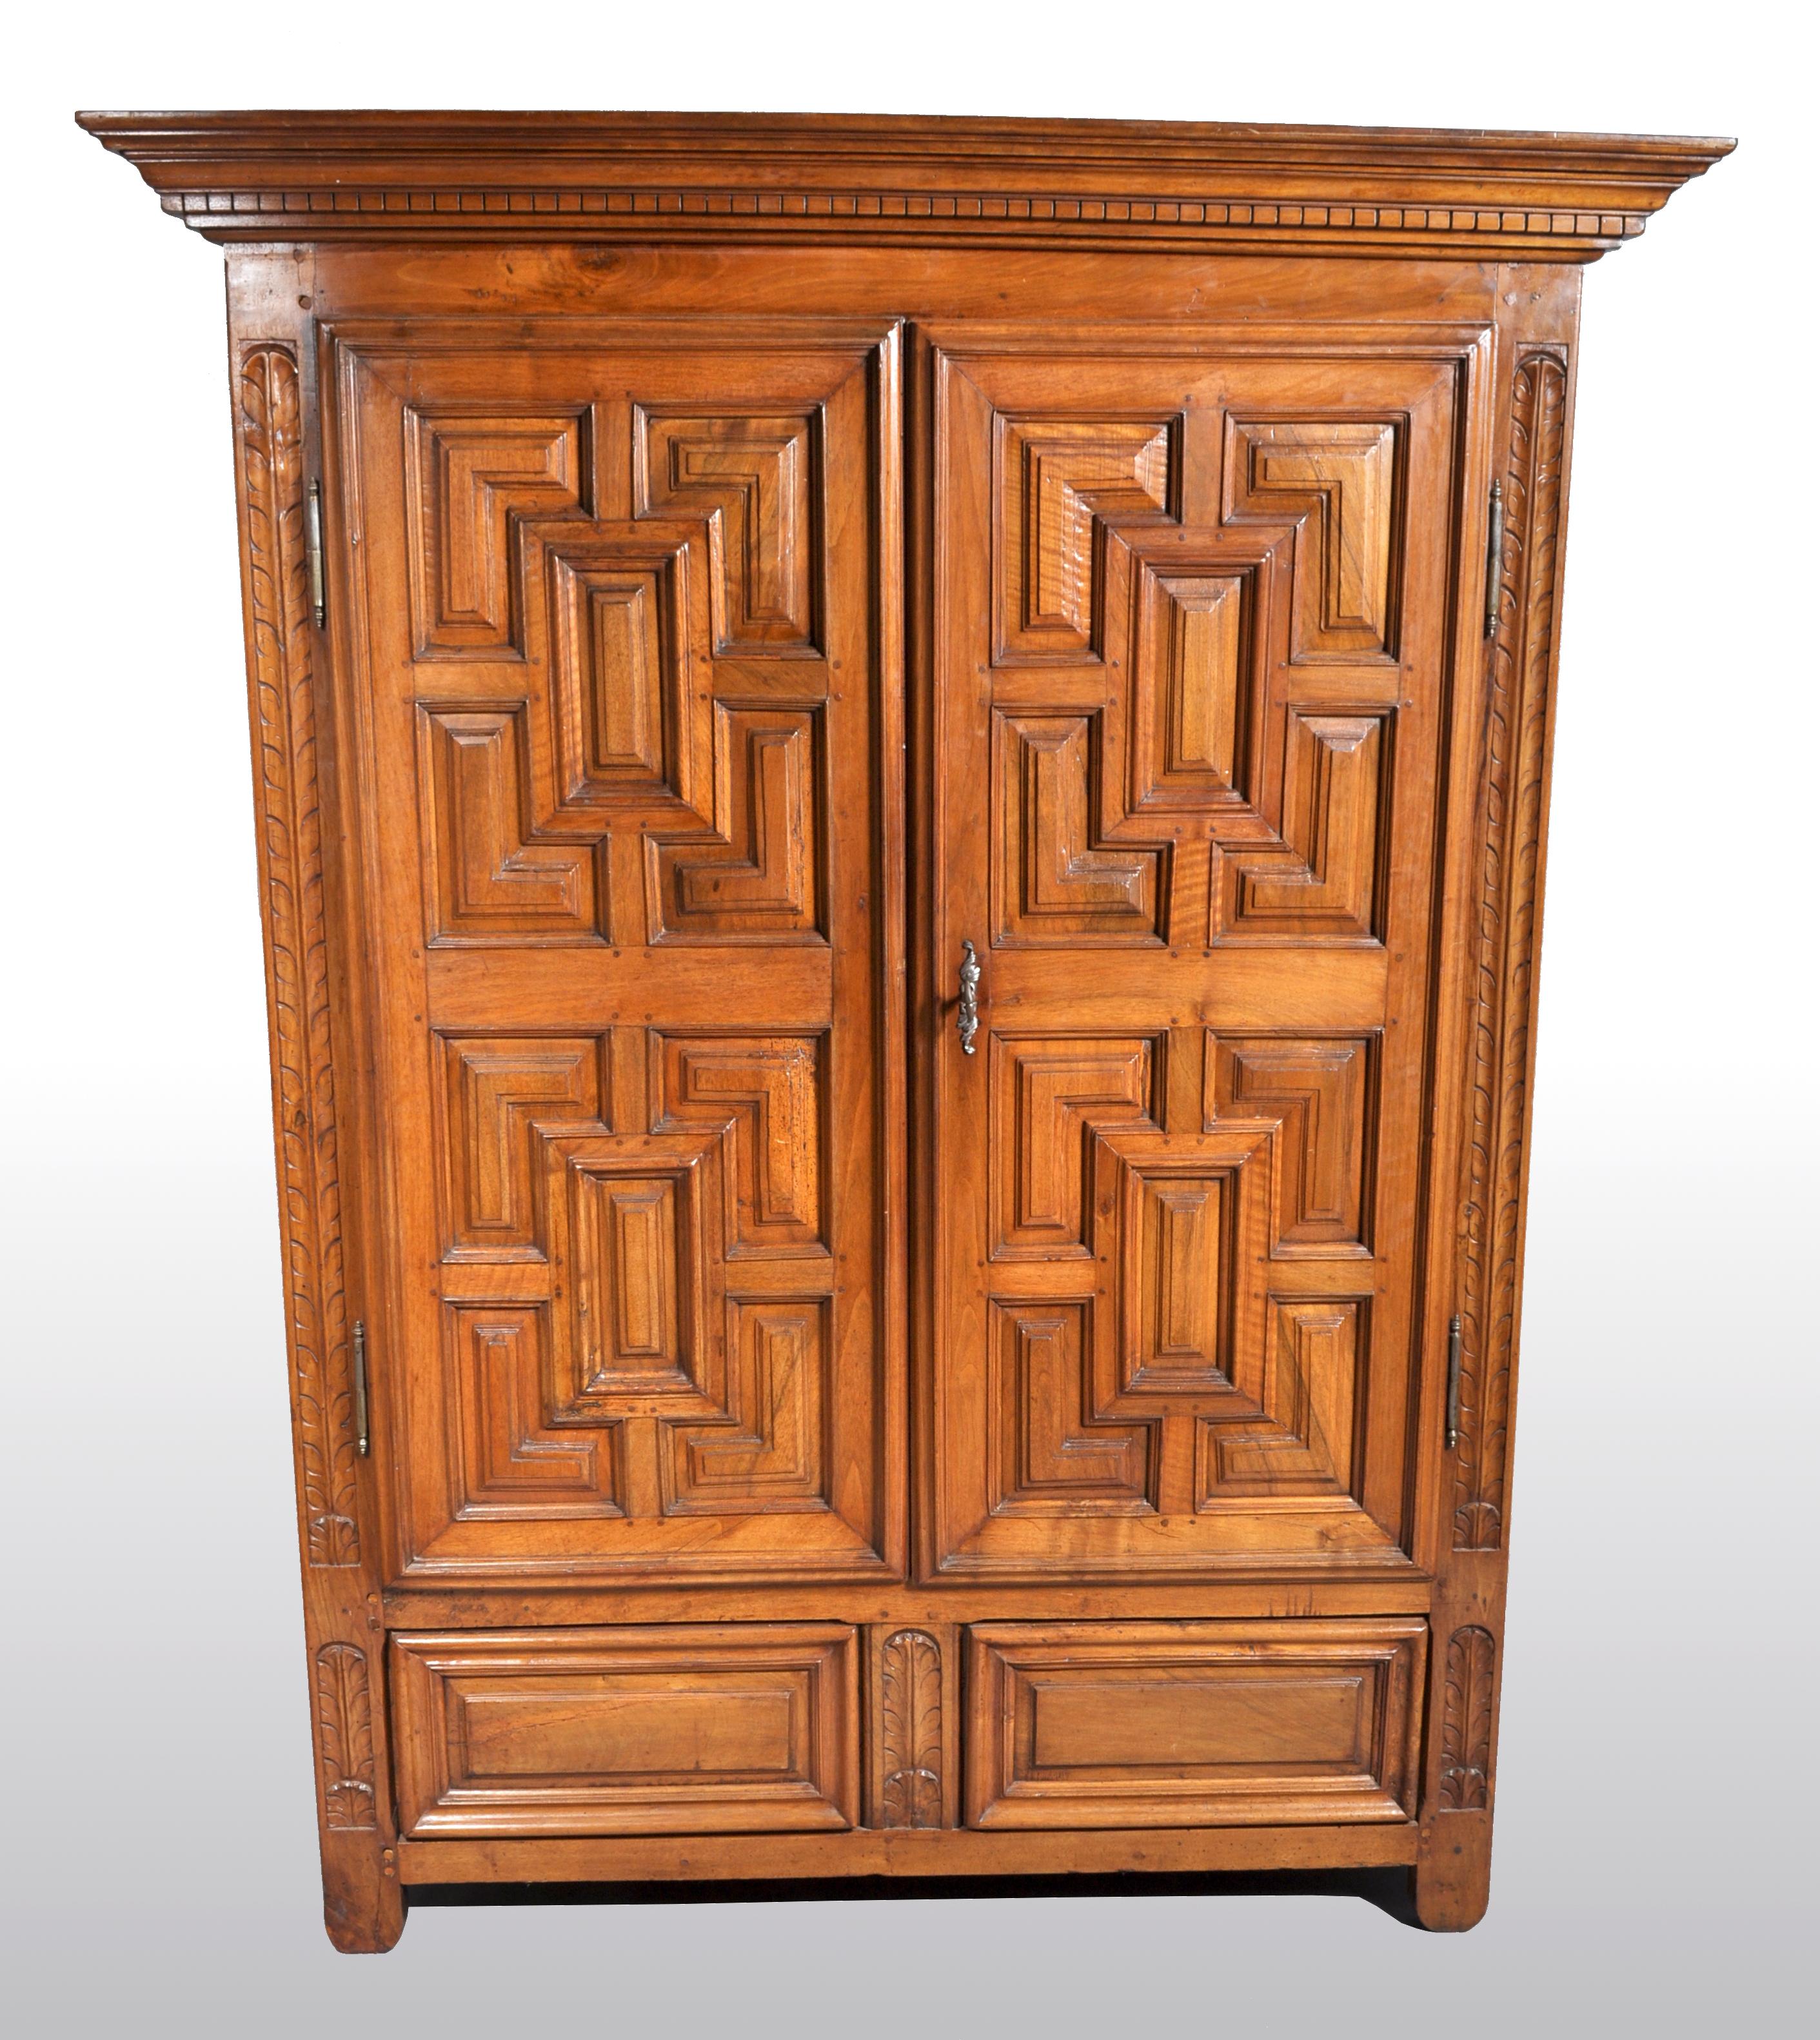 Hand-Carved Antique French Provincial Walnut Armoire / Cabinet, circa 1750